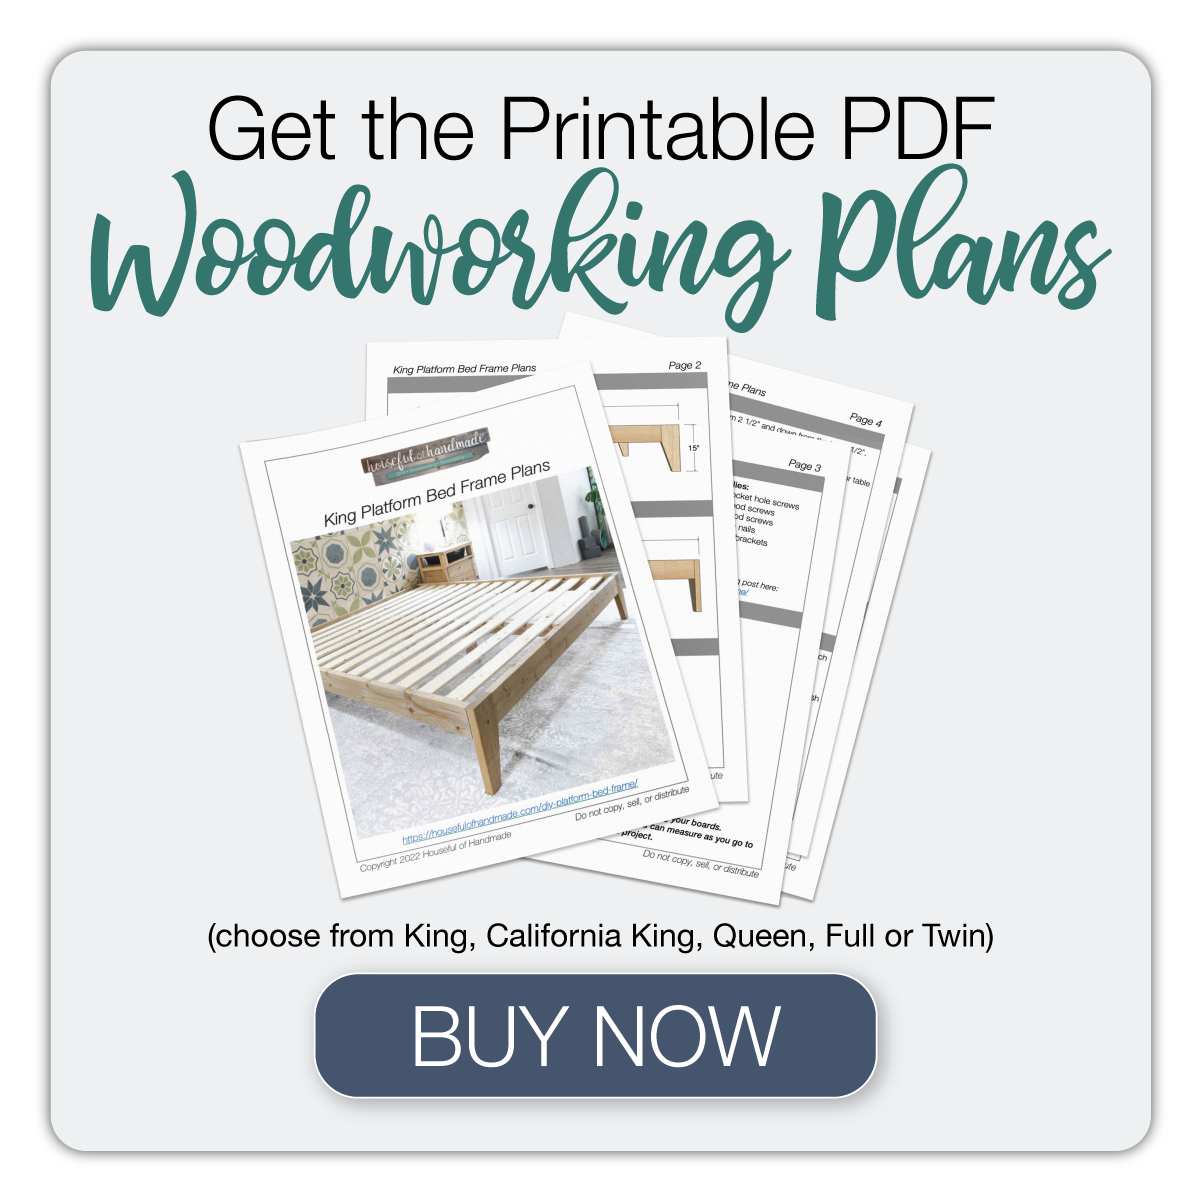 Button to buy the printable PDF woodworking plans for the platform bed frame build.